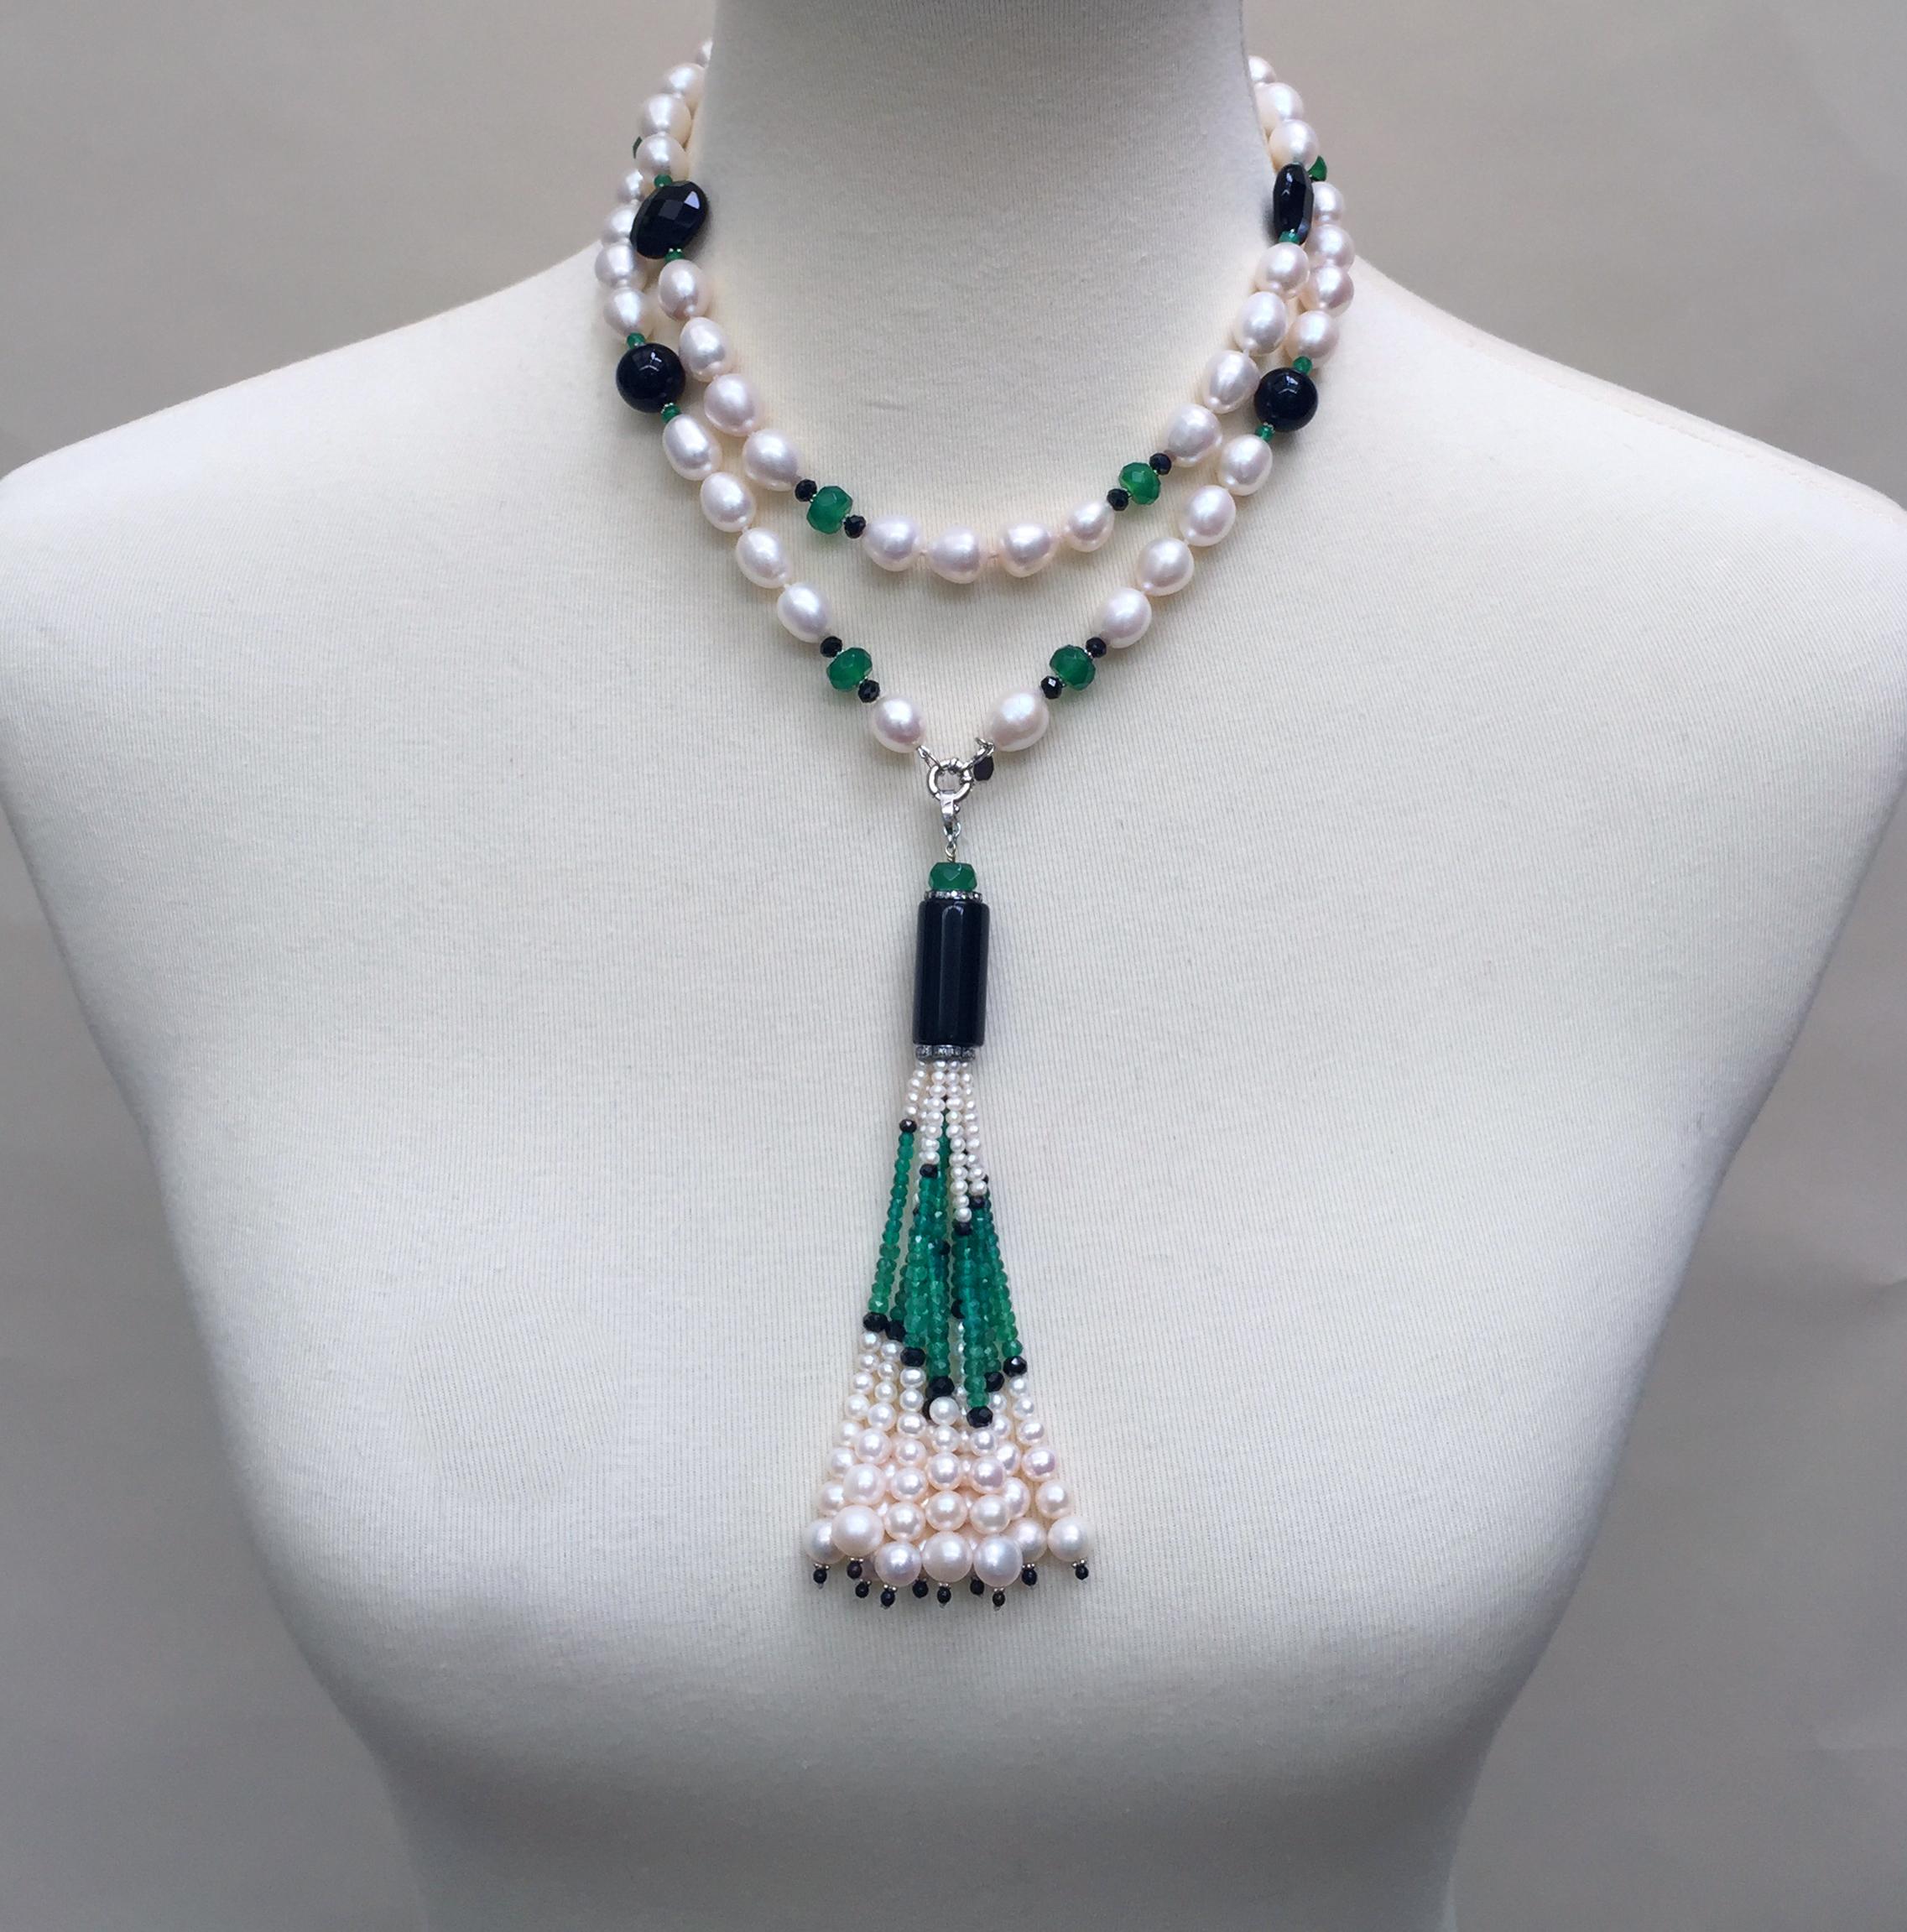 The black onyx, jade, and pearl necklace with  tassel and 14 karate white gold clasp is a beautifully handmade piece by Marina J.  The oblong pearls glow in contrast to the brilliant green jade and black onyx beads separated by small 14 k white gold